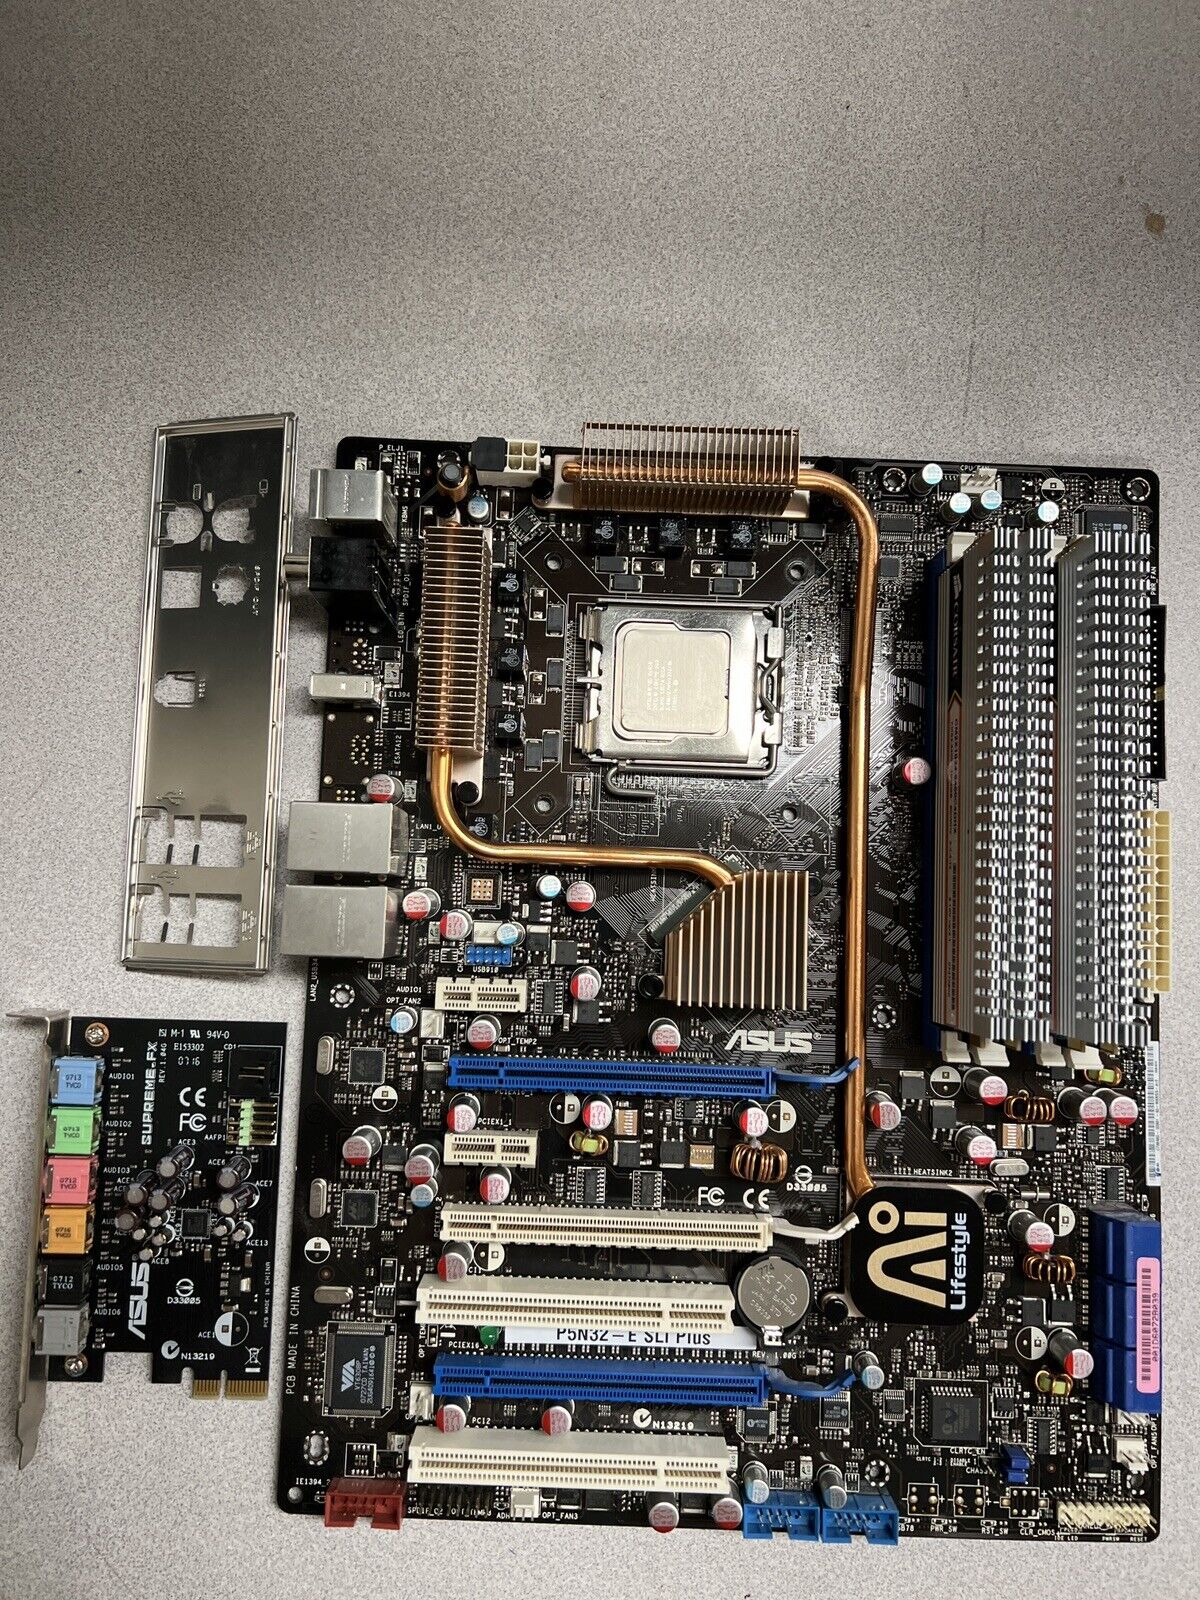 FOR PARTS- ASUS P5N32-E SLI PLUS MOTHERBOARD COMBO